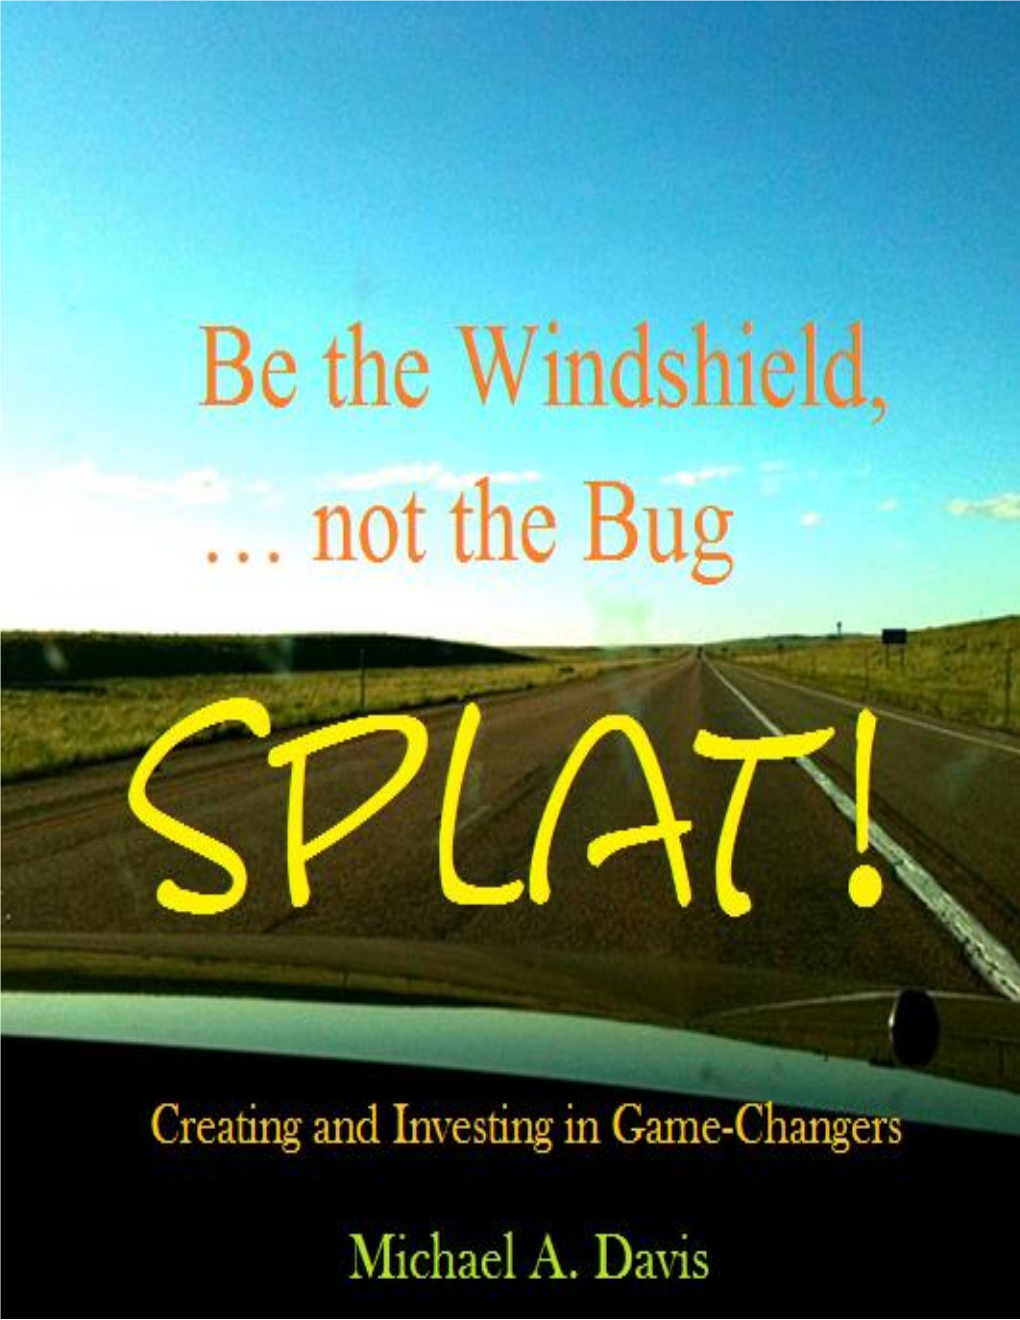 Splat! Starts Off with the Essence of Change and … Hyper-Change